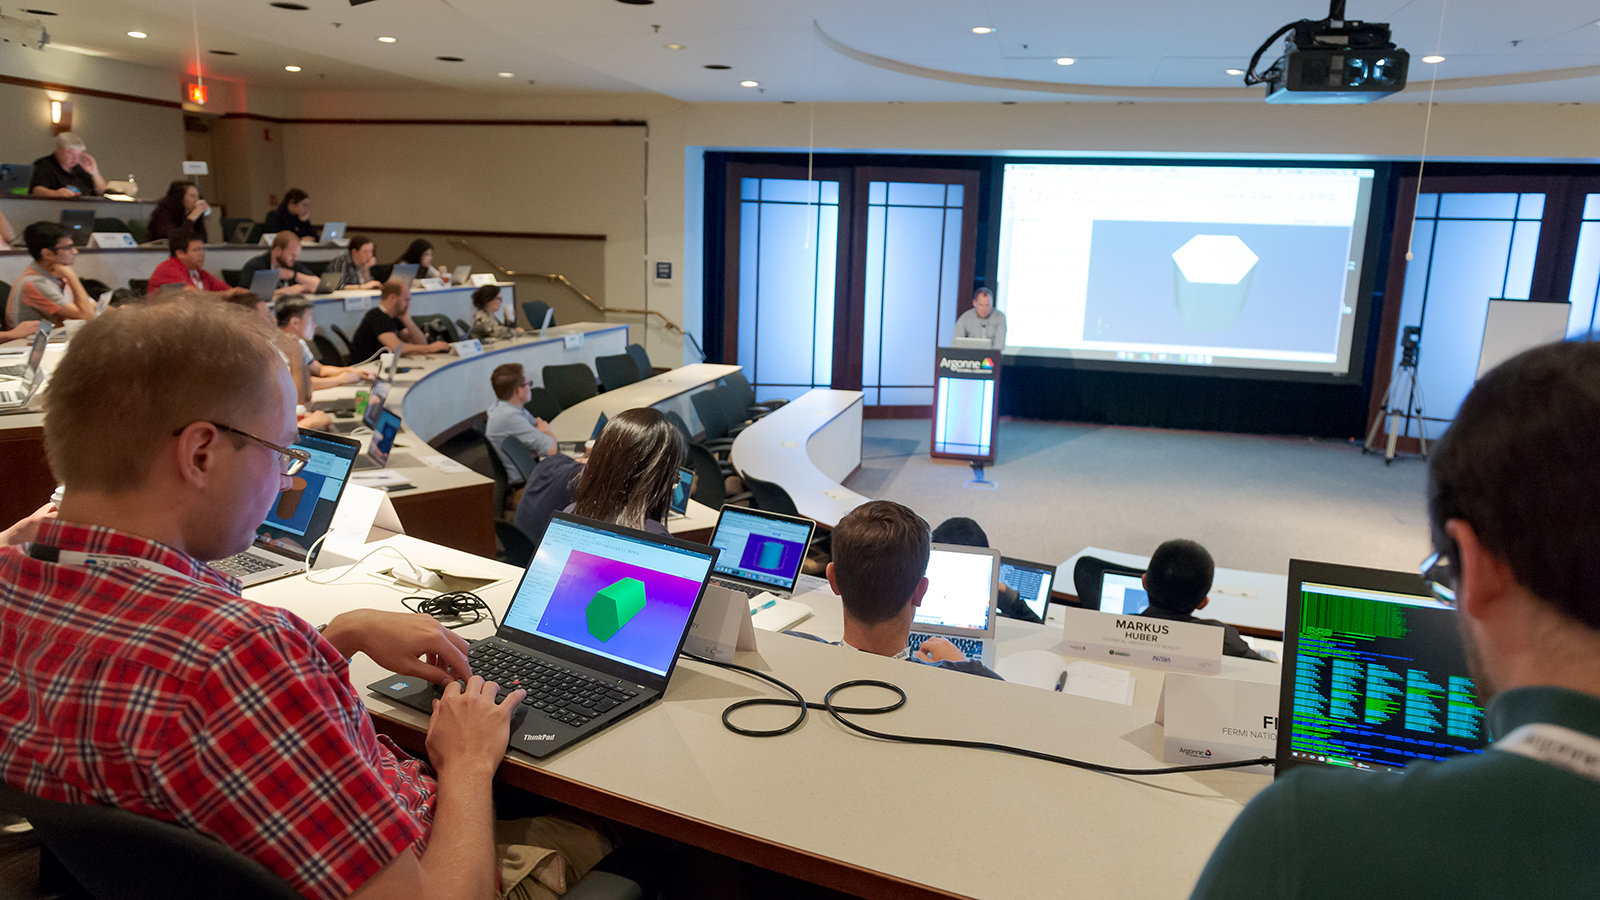 The annual training event, which was held at the Q Center in St. Charles, Illinois, this summer, has now hosted nearly 500 participants since it was launched in 2013. (Image by Argonne National Laboratory.)